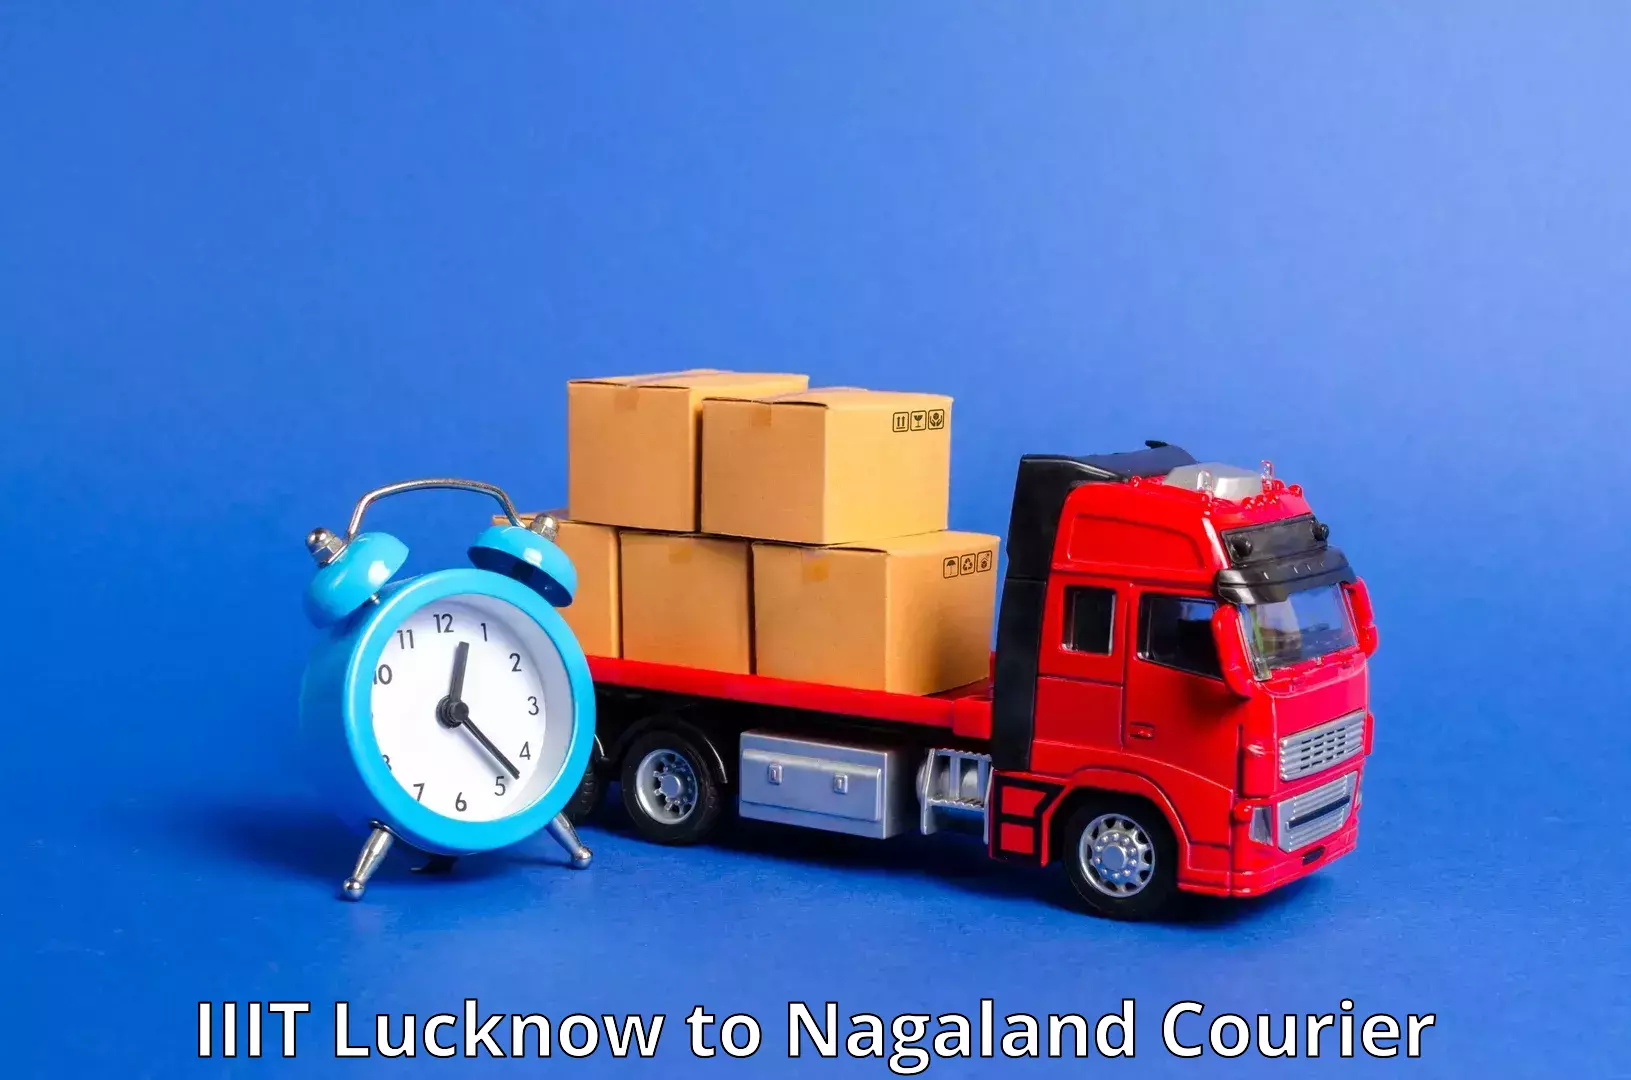 Efficient parcel tracking IIIT Lucknow to Nagaland